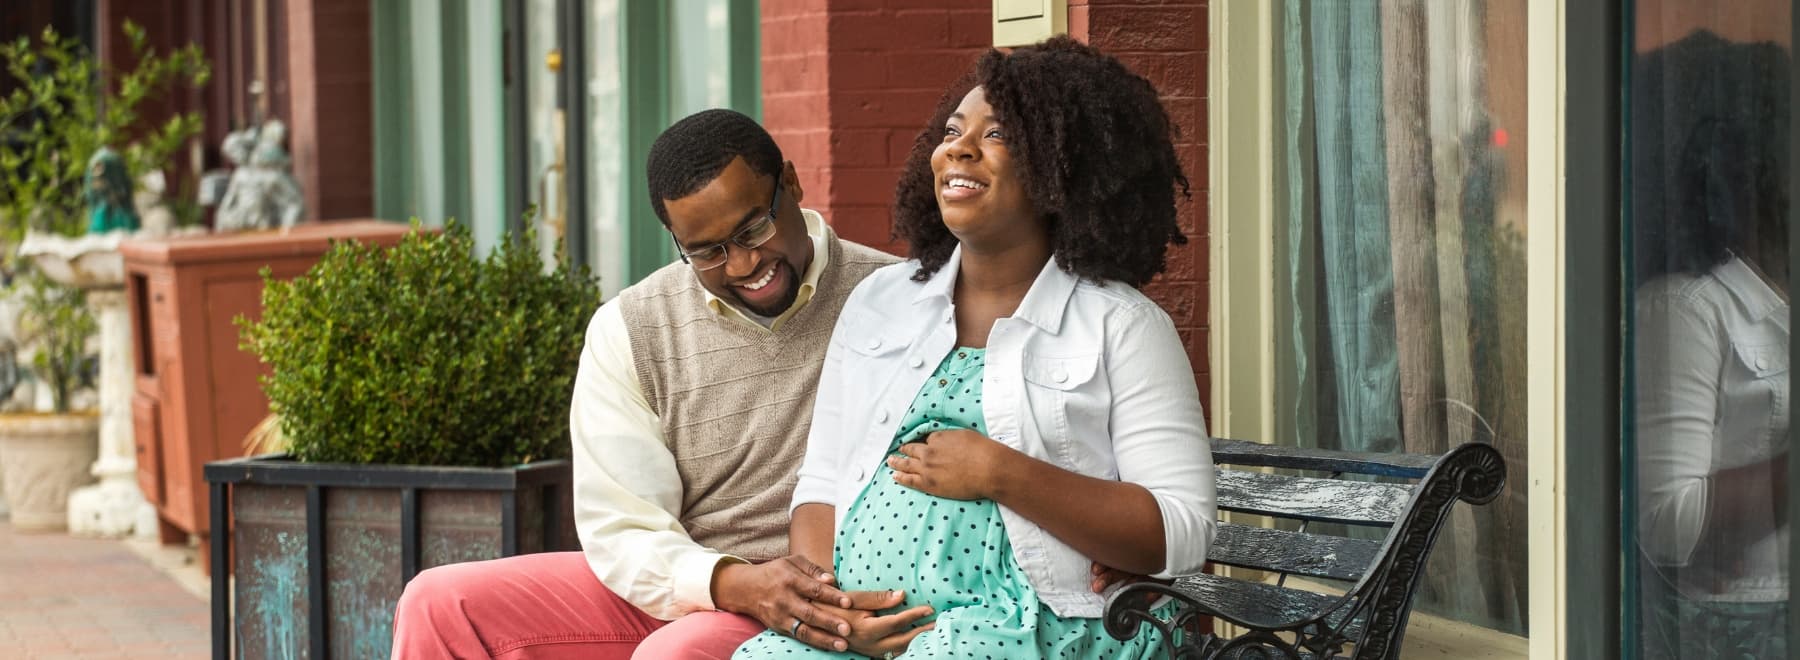 Smiling man puts hand on pregnant woman's stomach while sitting on a bench